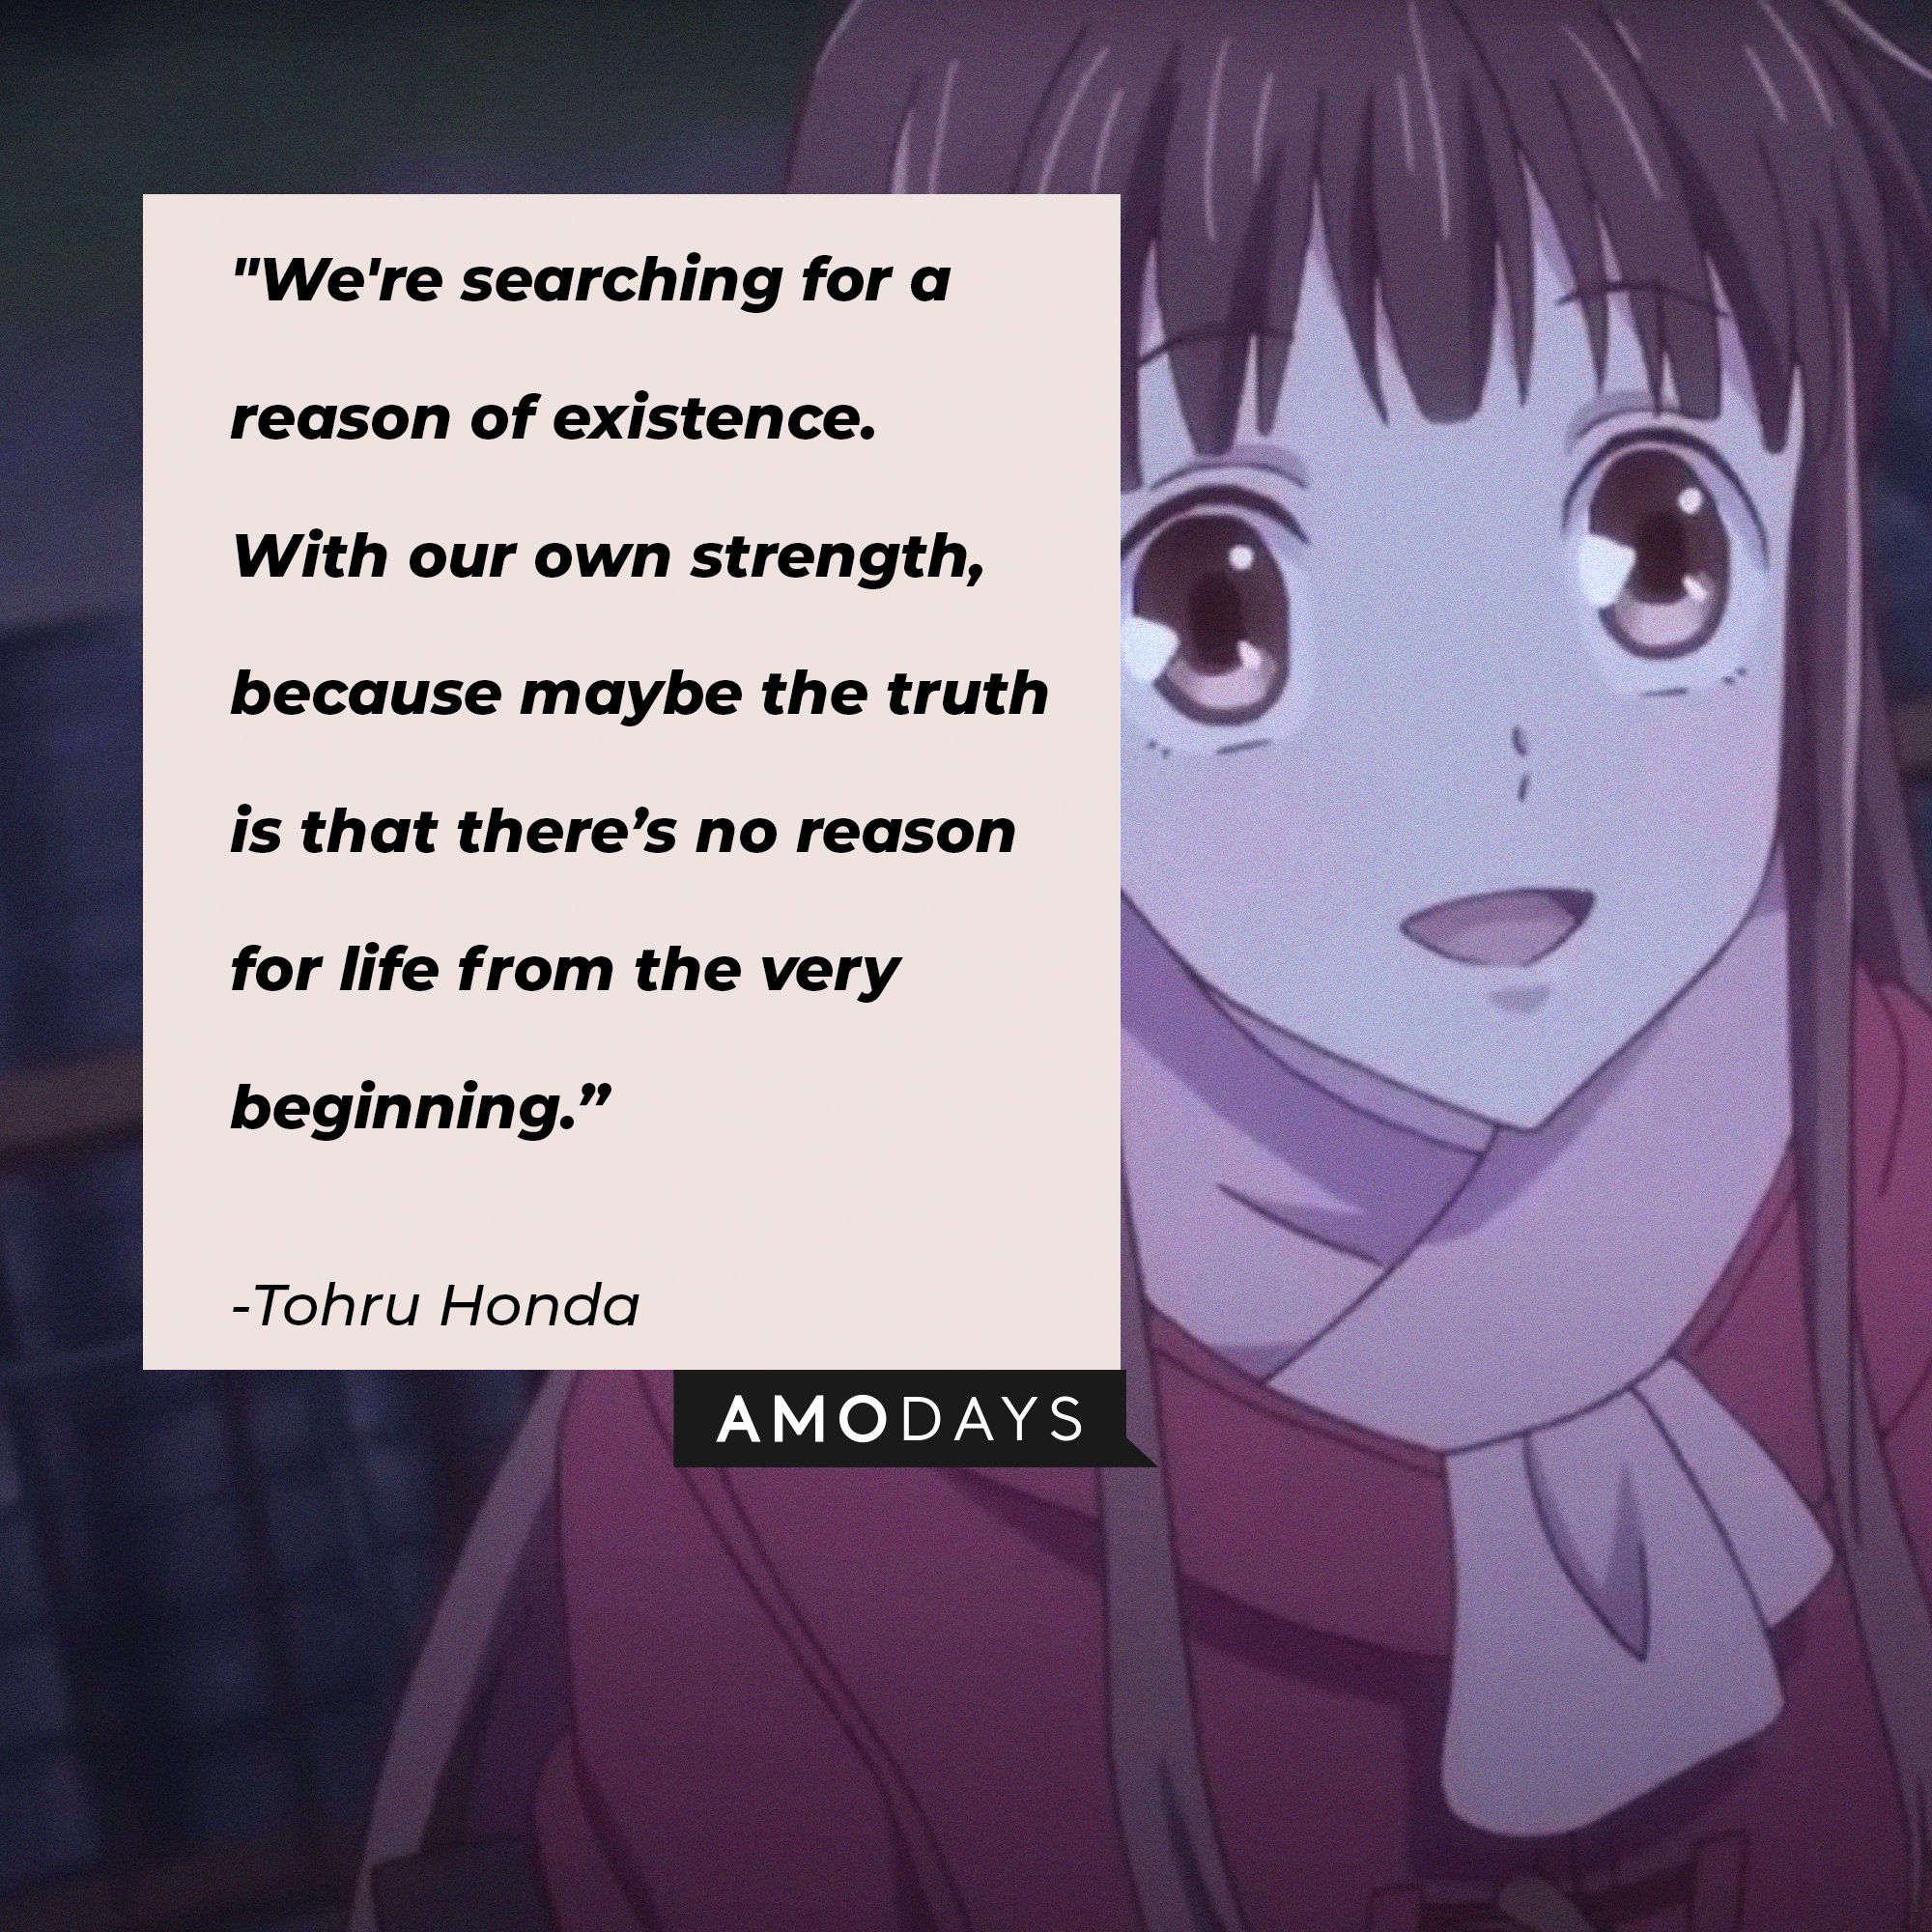 Tohru Honda’s quote: "We're searching for a reason of existence. With our own strength, because maybe the truth is that there’s no reason for life from the very beginning.”  | Image: AmoDays